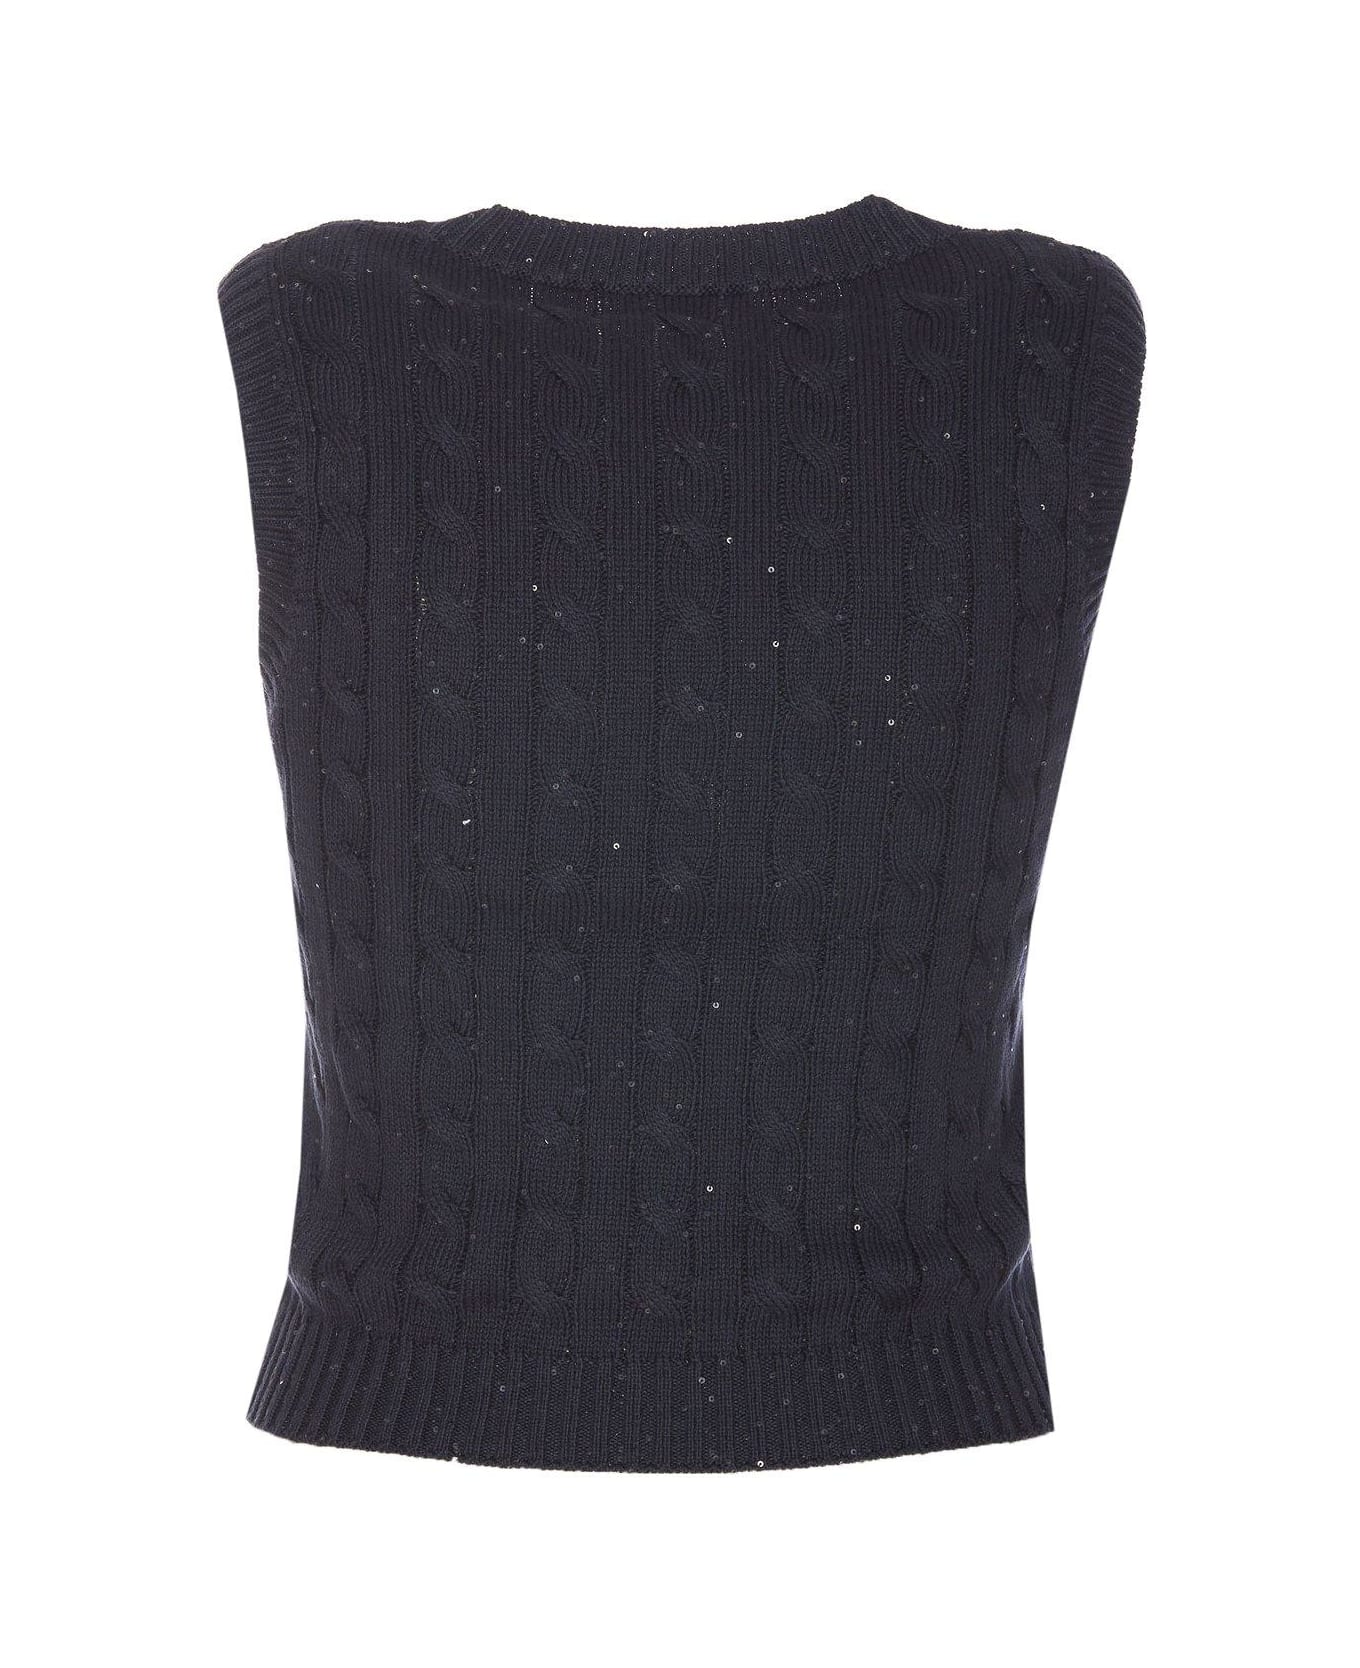 Brunello Cucinelli Sequin Embellished Cable-knitted Top - BLACK ベスト